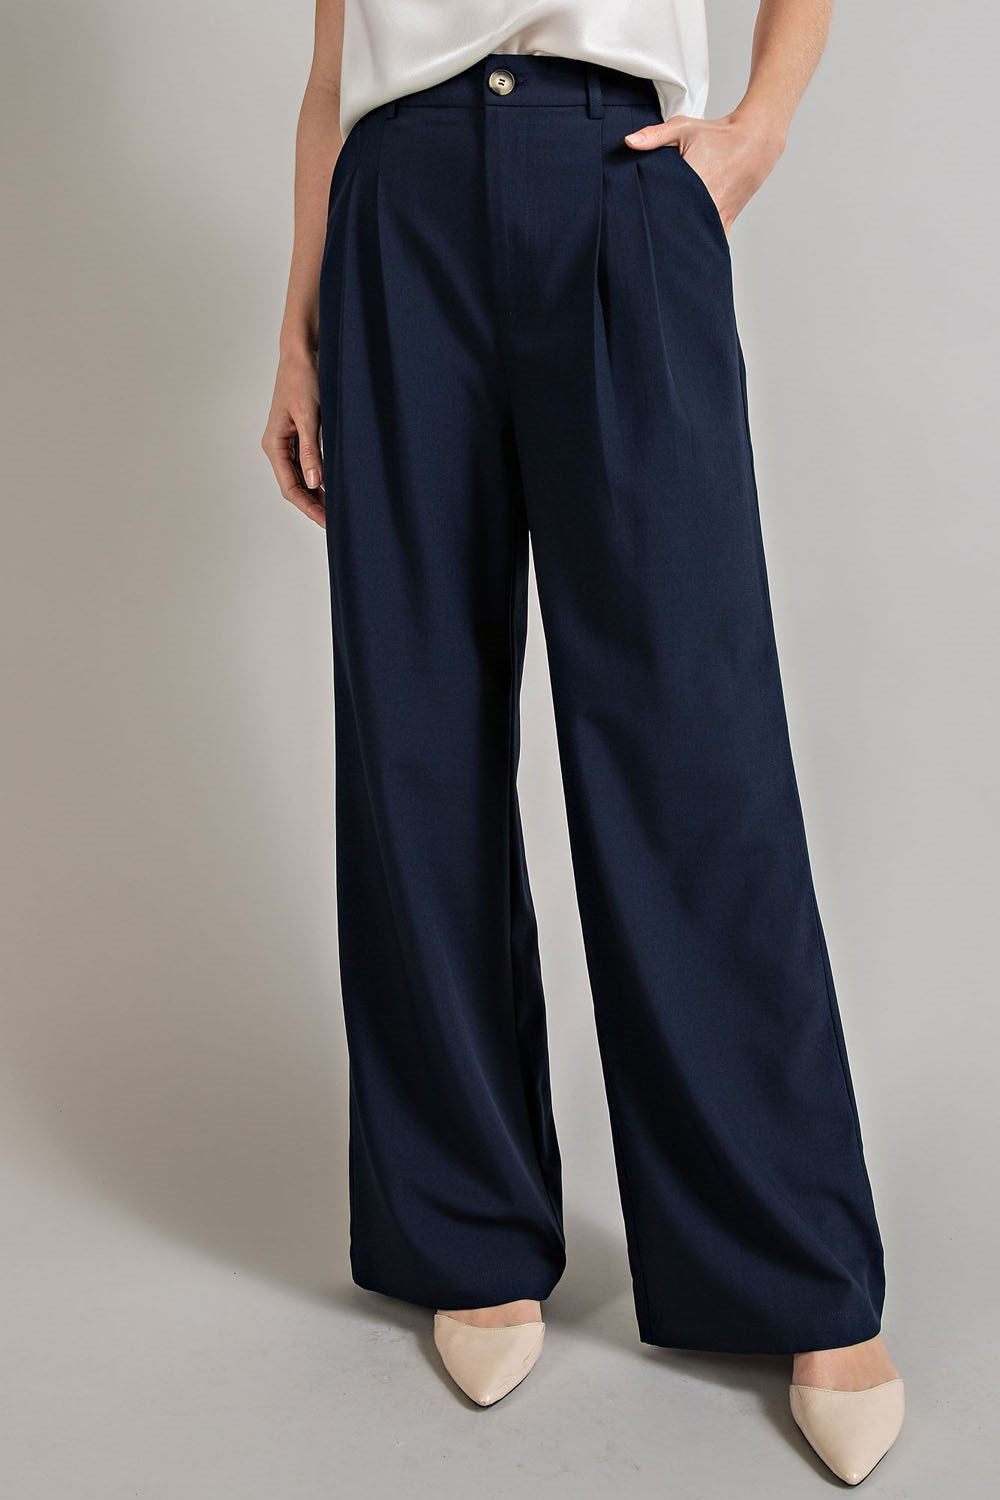 Clarissa Navy Straight Leg Pants (Small to 2X) – AllyOops Boutique